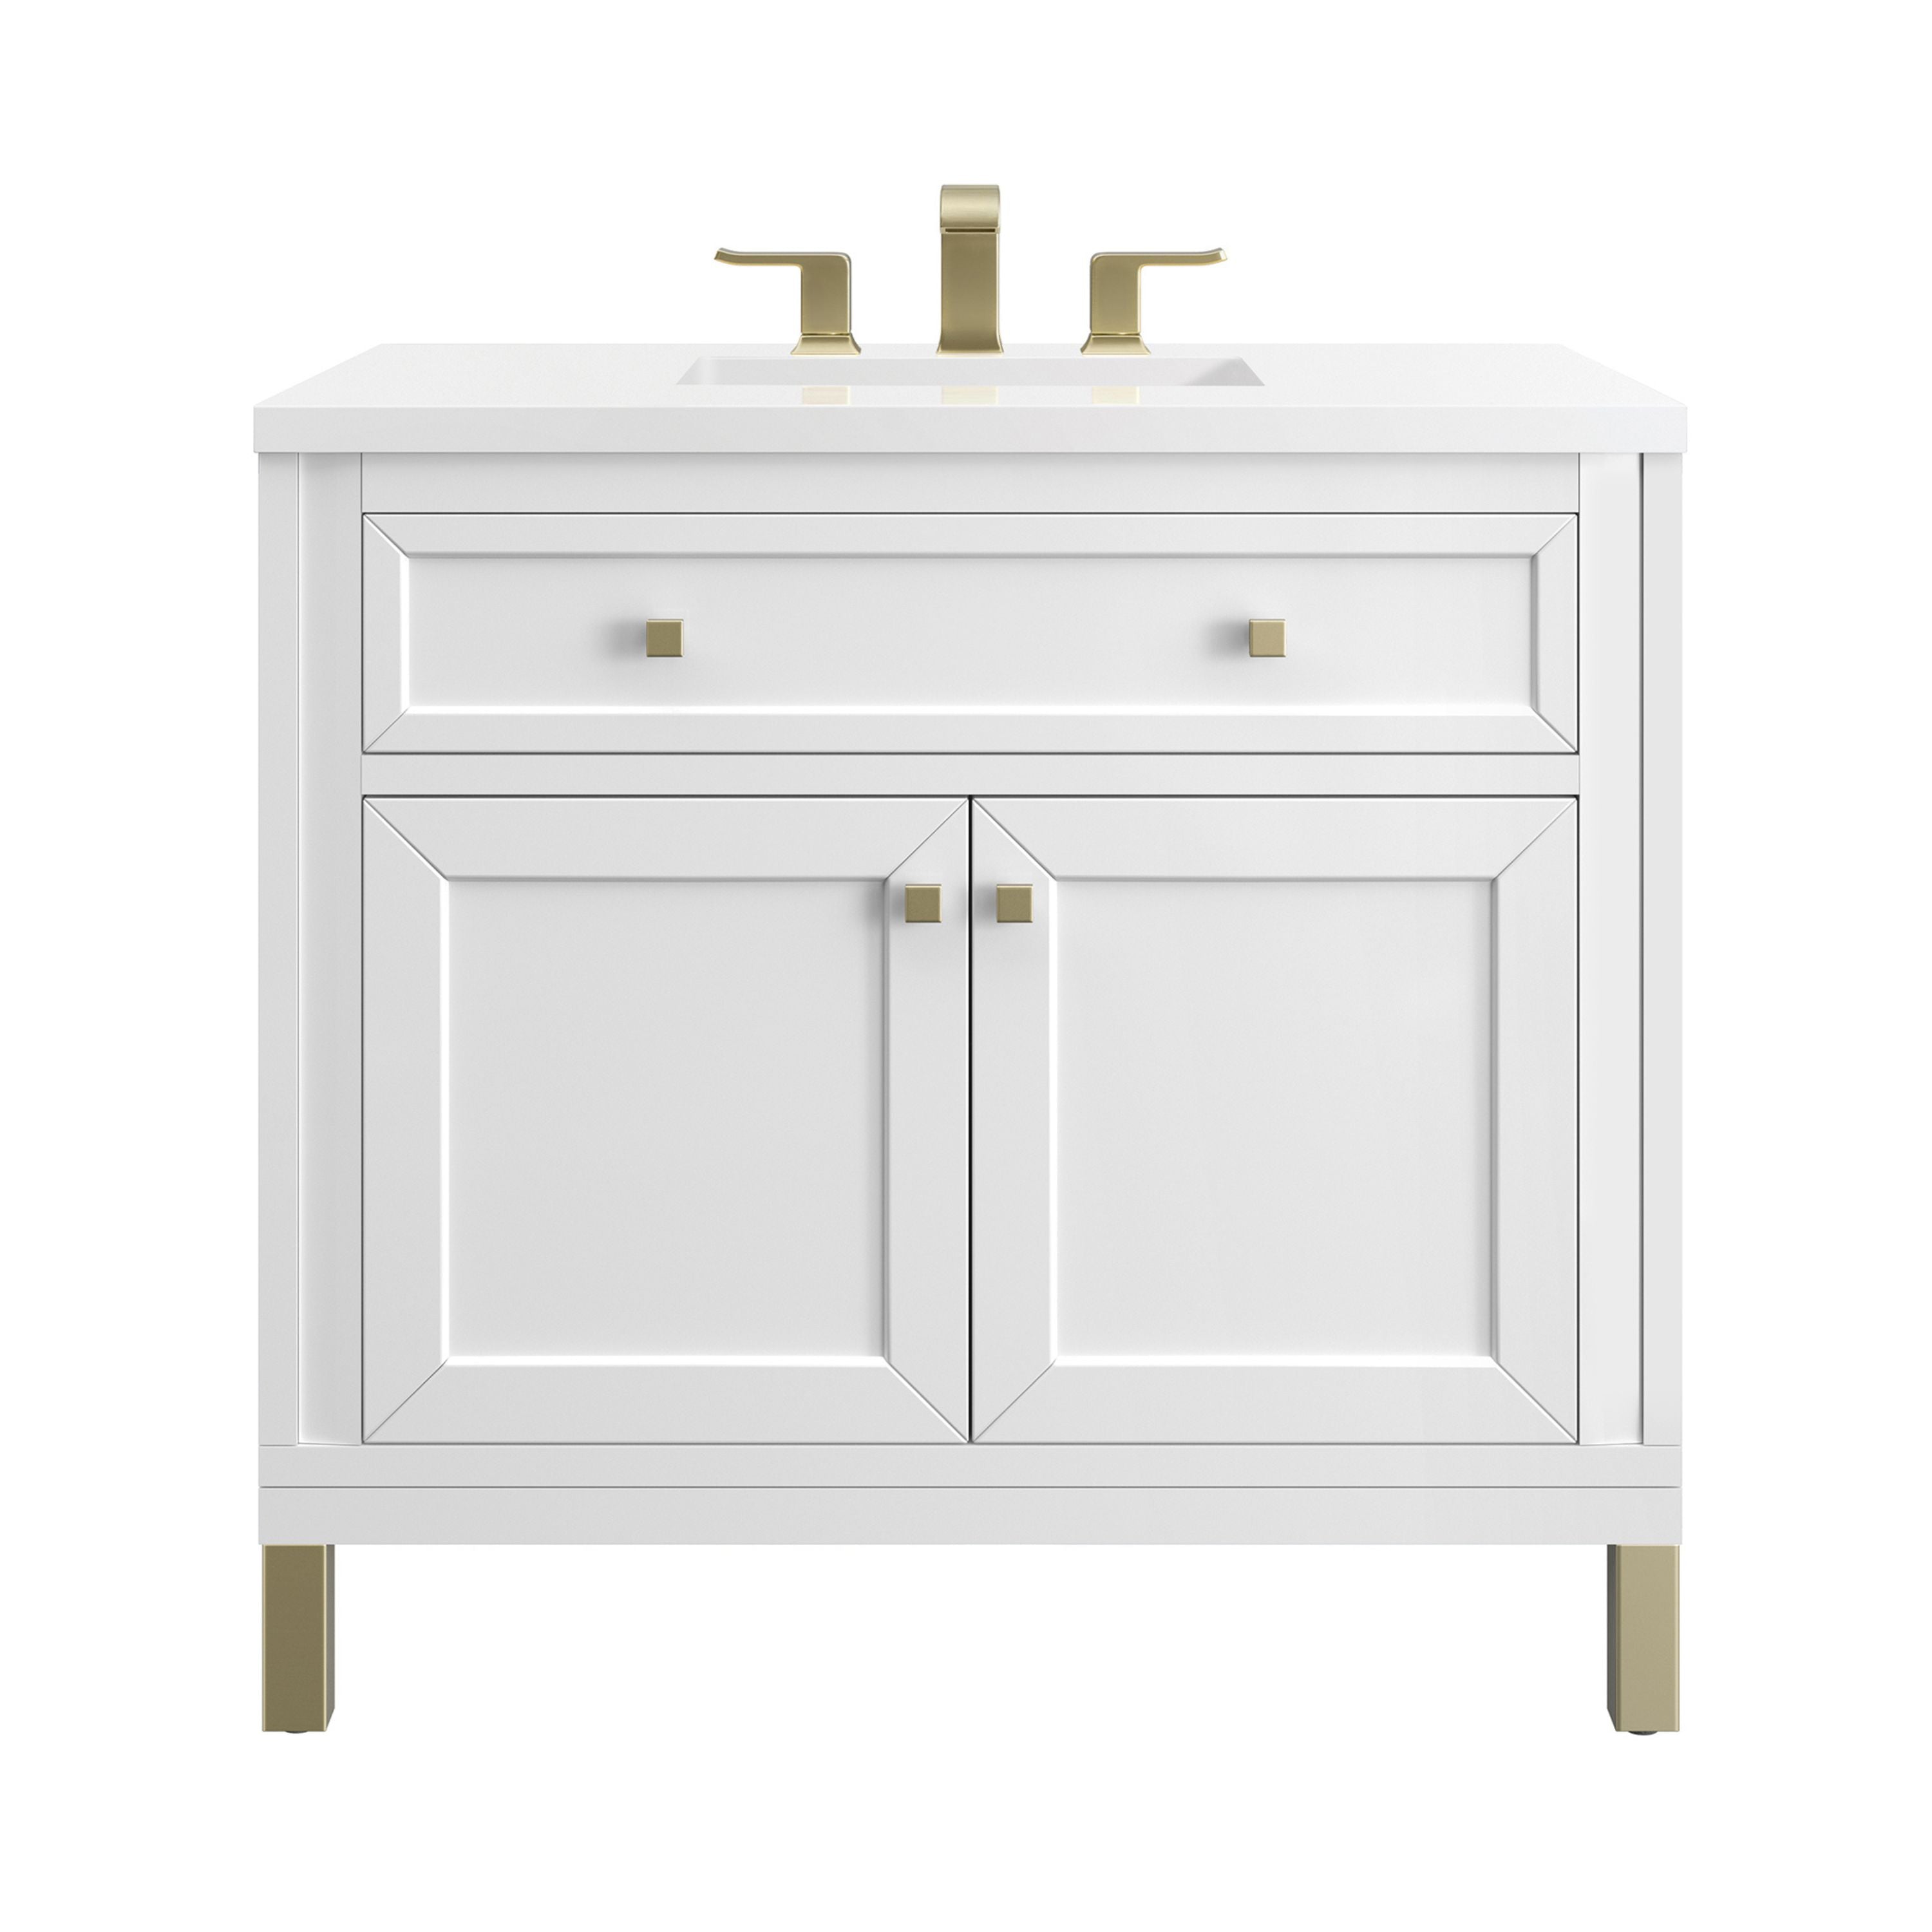 James Martin Vanities Chicago Collection 36 in. Single Vanity in Glossy White with Countertop Options